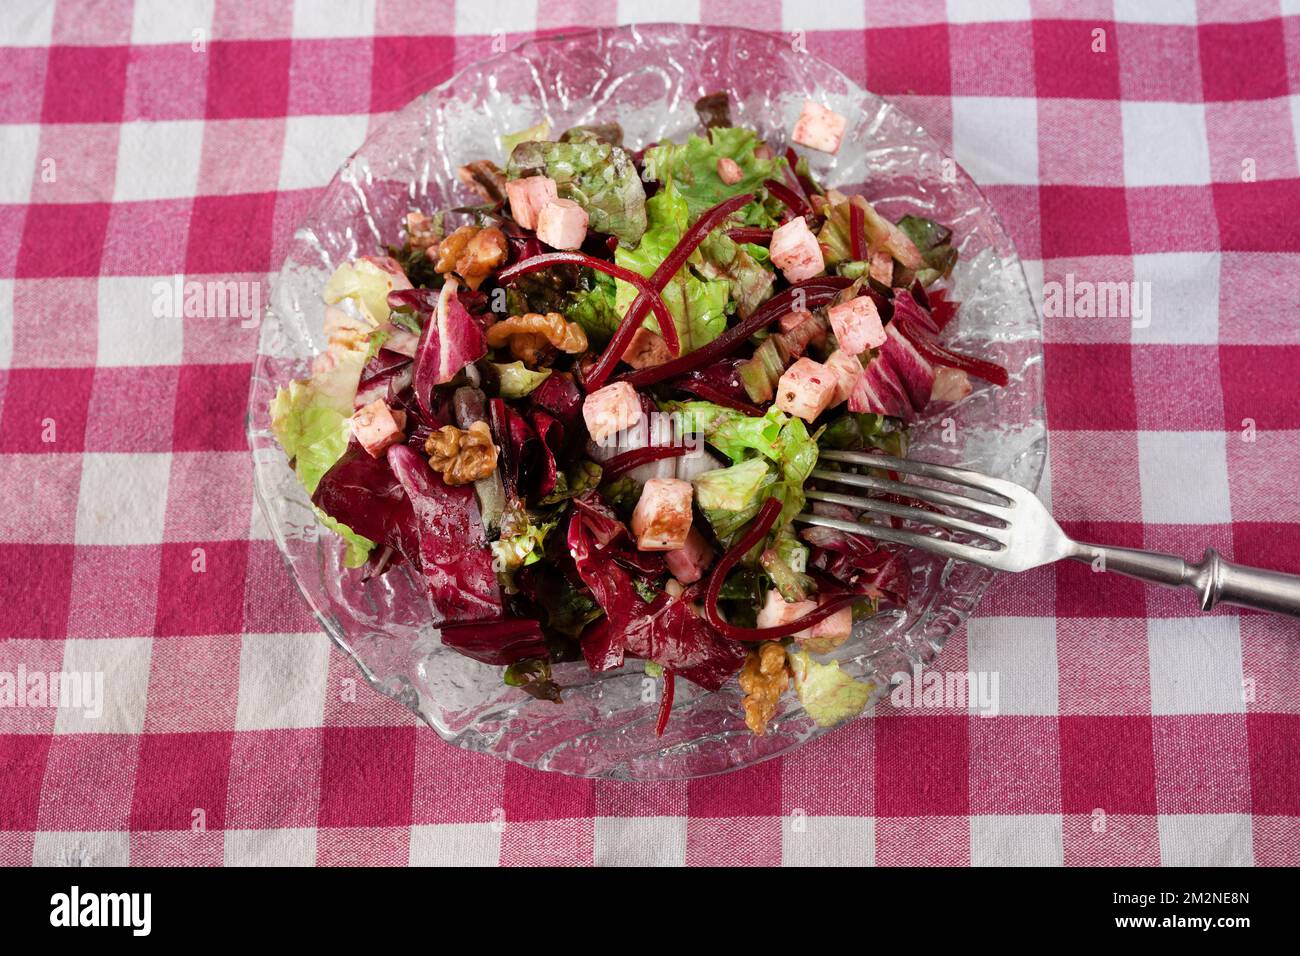 Fresh vegetable salad, lettuce leaf, beetroot, tofu and walnut on glass plate with fork on purple checkered tablecloth. Stock Photo